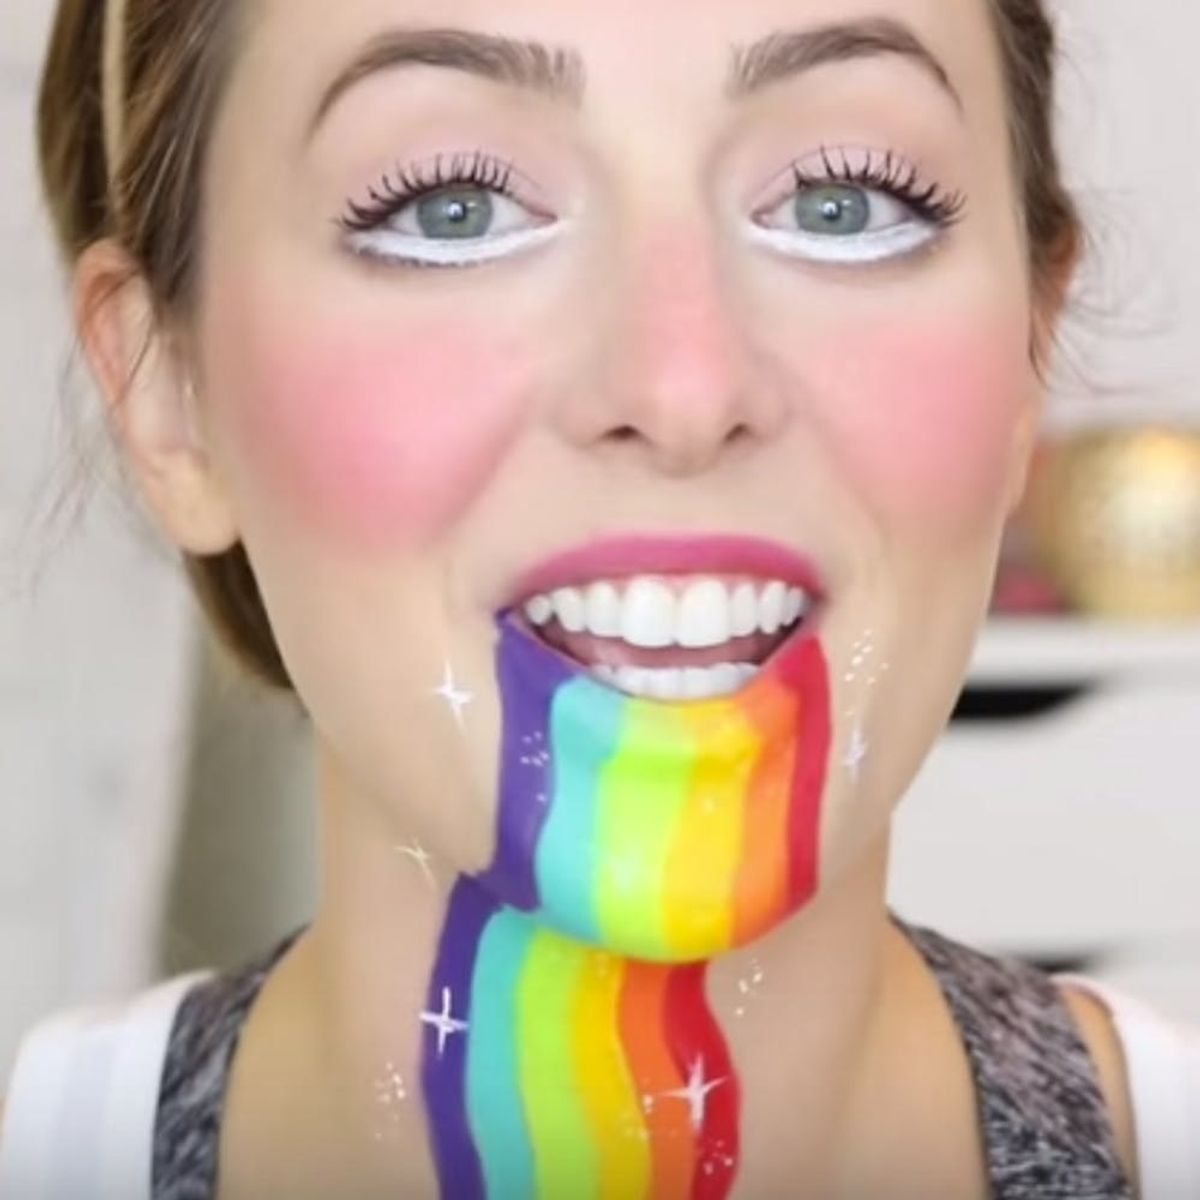 This Genius Tutorial Shows You How to Become a Snapchat Filter for Halloween